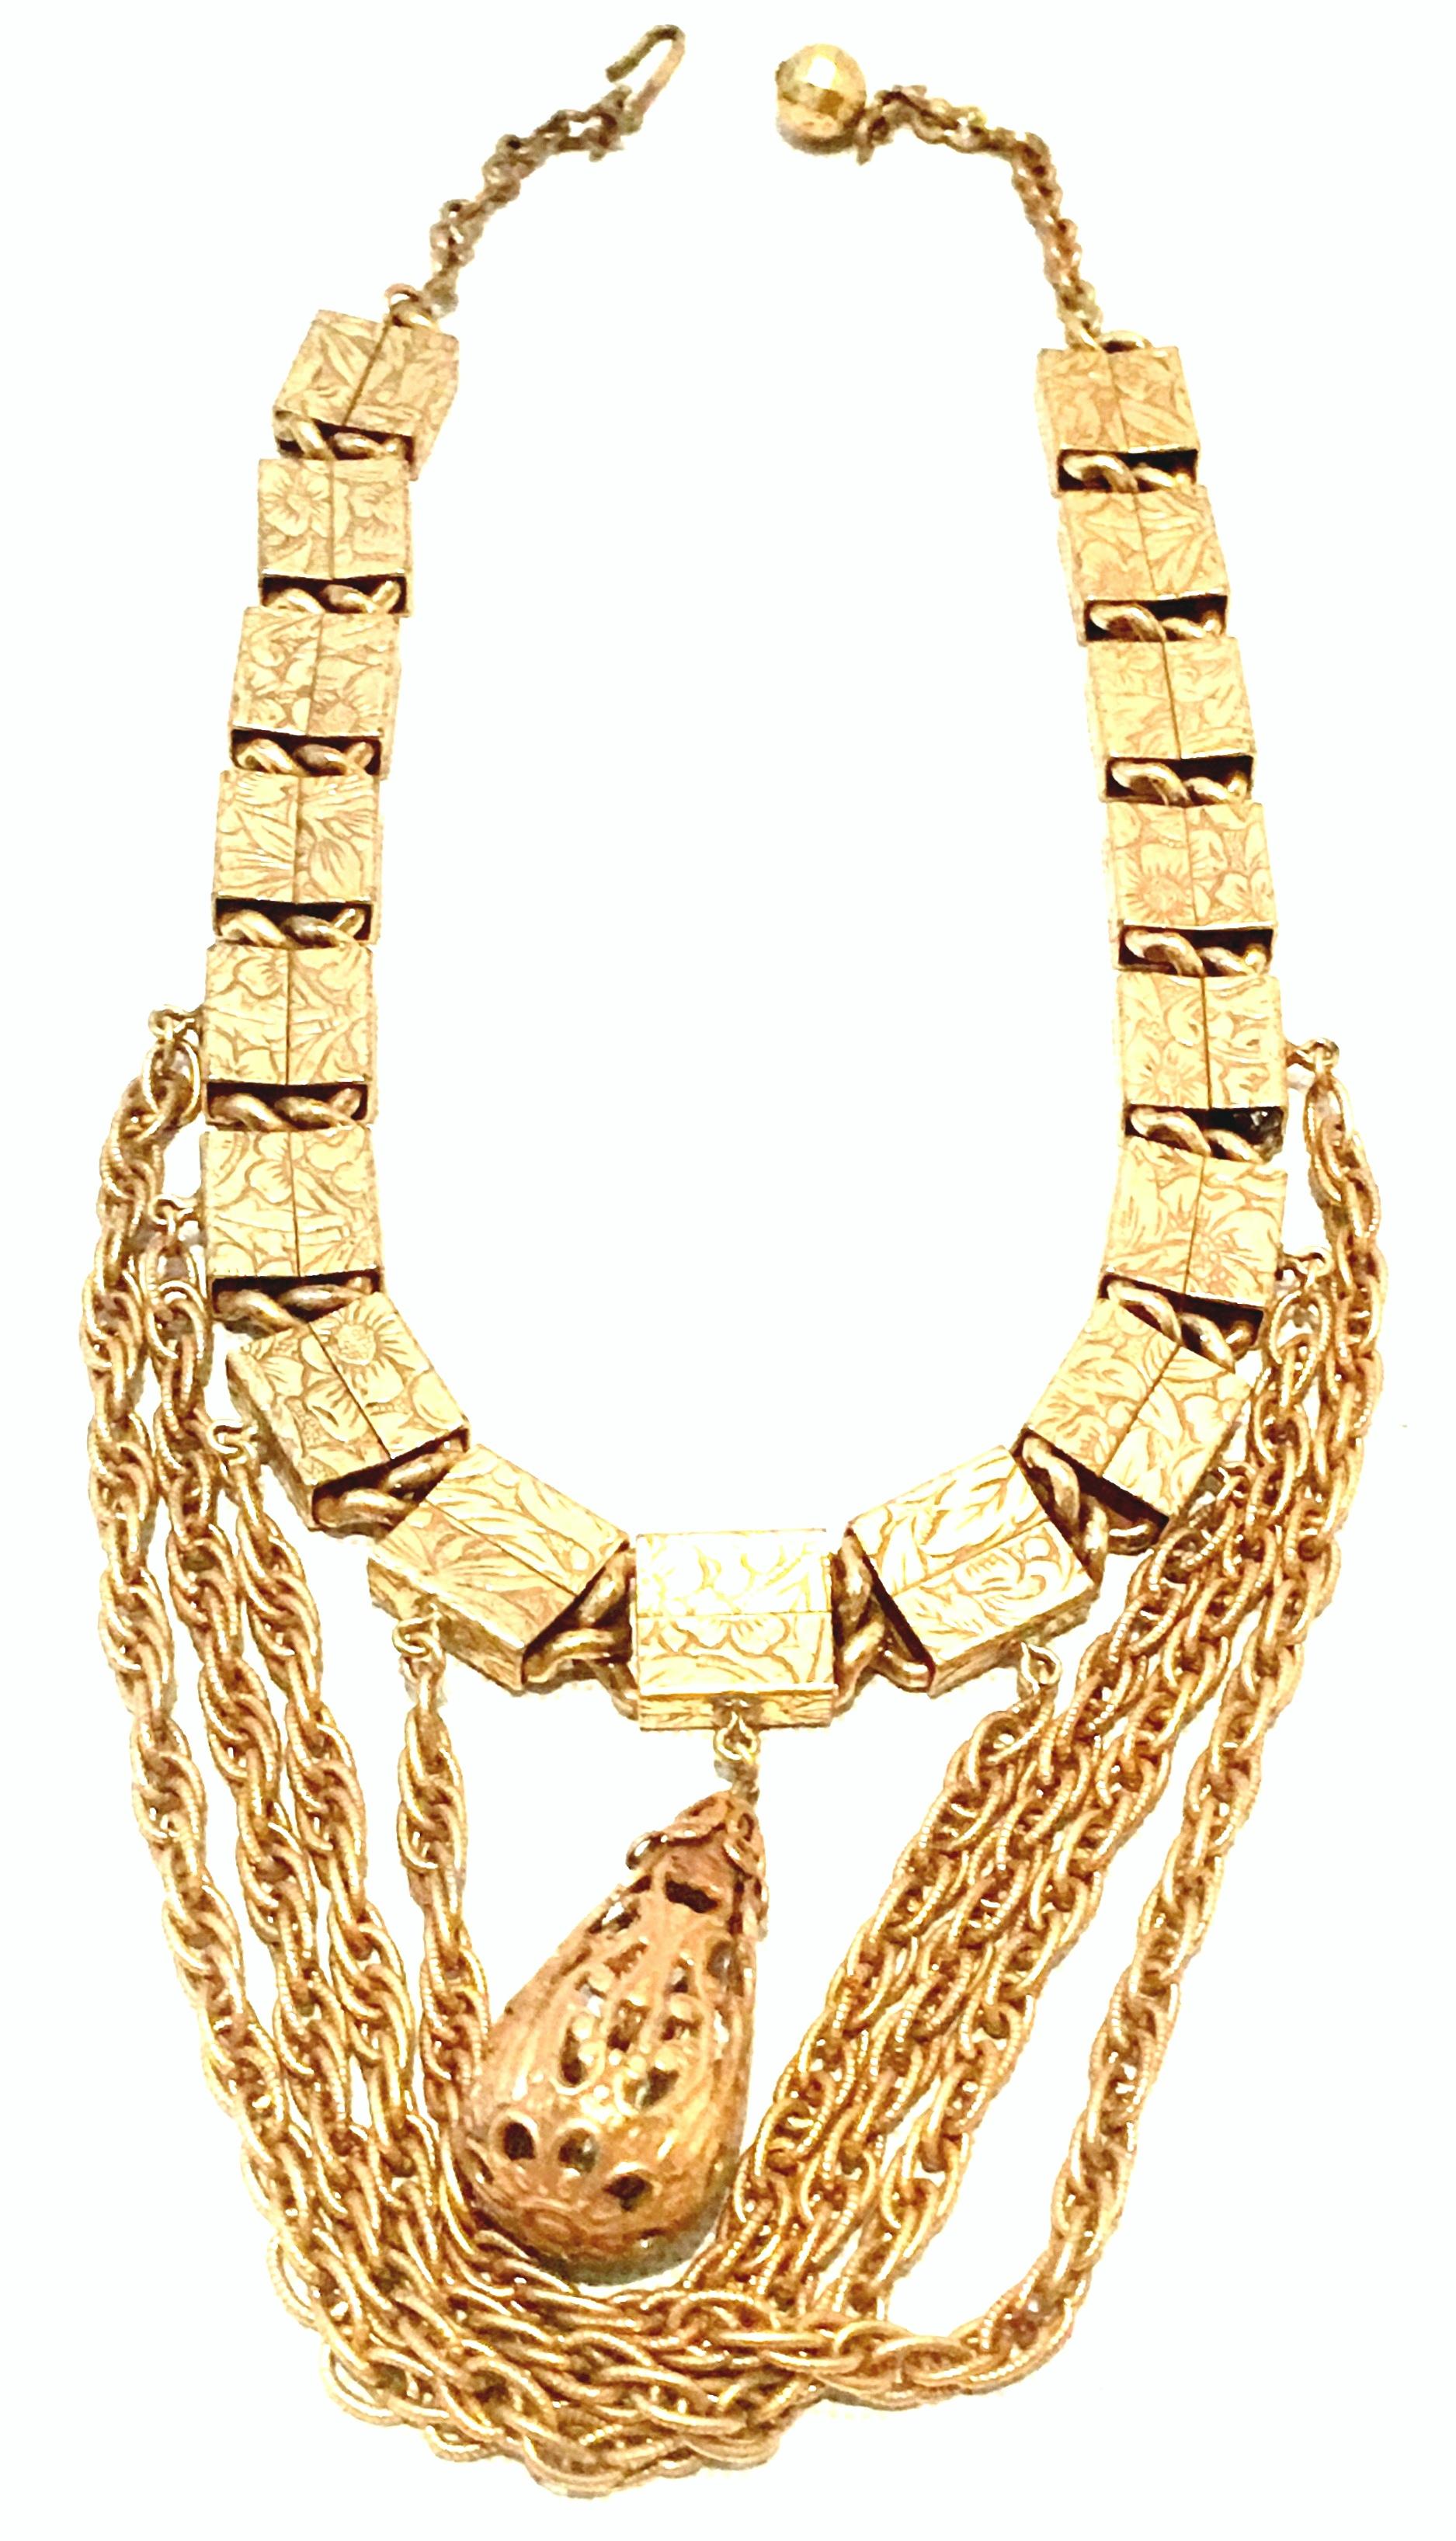 20th Century Art Nouveau Gold Book Chain Choker Style Necklace & Earrings S/3 For Sale 1